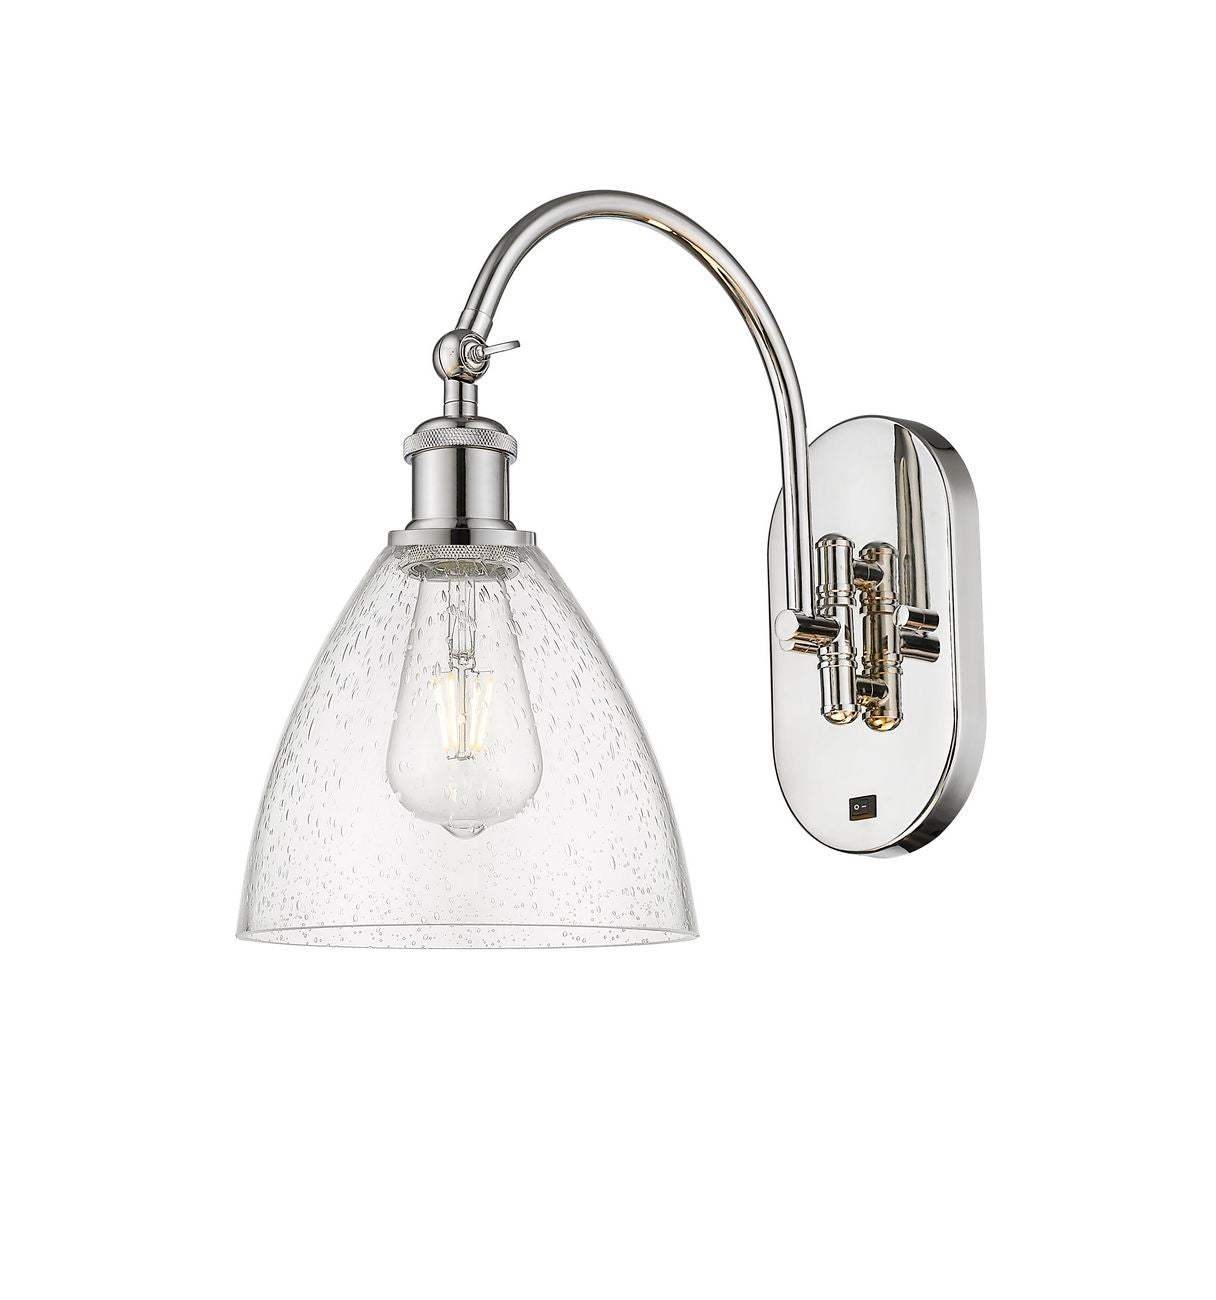 518-1W-PN-GBD-754 1-Light 8" Polished Nickel Sconce - Seedy Ballston Dome Glass - LED Bulb - Dimmensions: 8 x 13.75 x 13.25 - Glass Up or Down: Yes